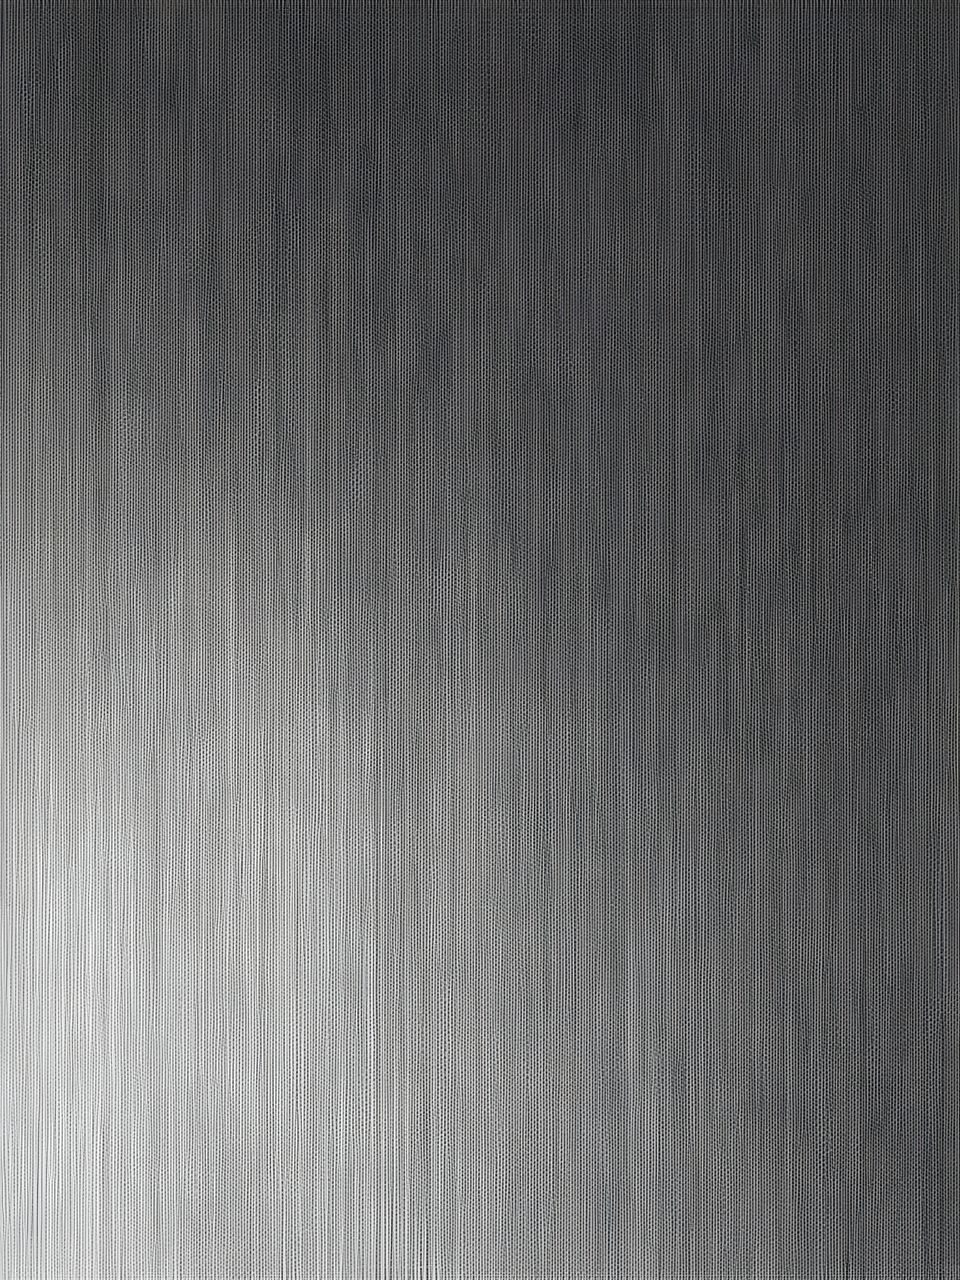 backgrounds, textured, pattern, silver, brushed metal, metal, wood, full frame, gray, no people, brown, floor, alloy, steel, aluminum, copy space, material, laminate flooring, textured effect, stainless steel, close-up, abstract, grey, macro, industry, black and white, flooring, wood flooring, plywood, extreme close-up, rough, hardwood, simplicity, empty, monochrome, surface level